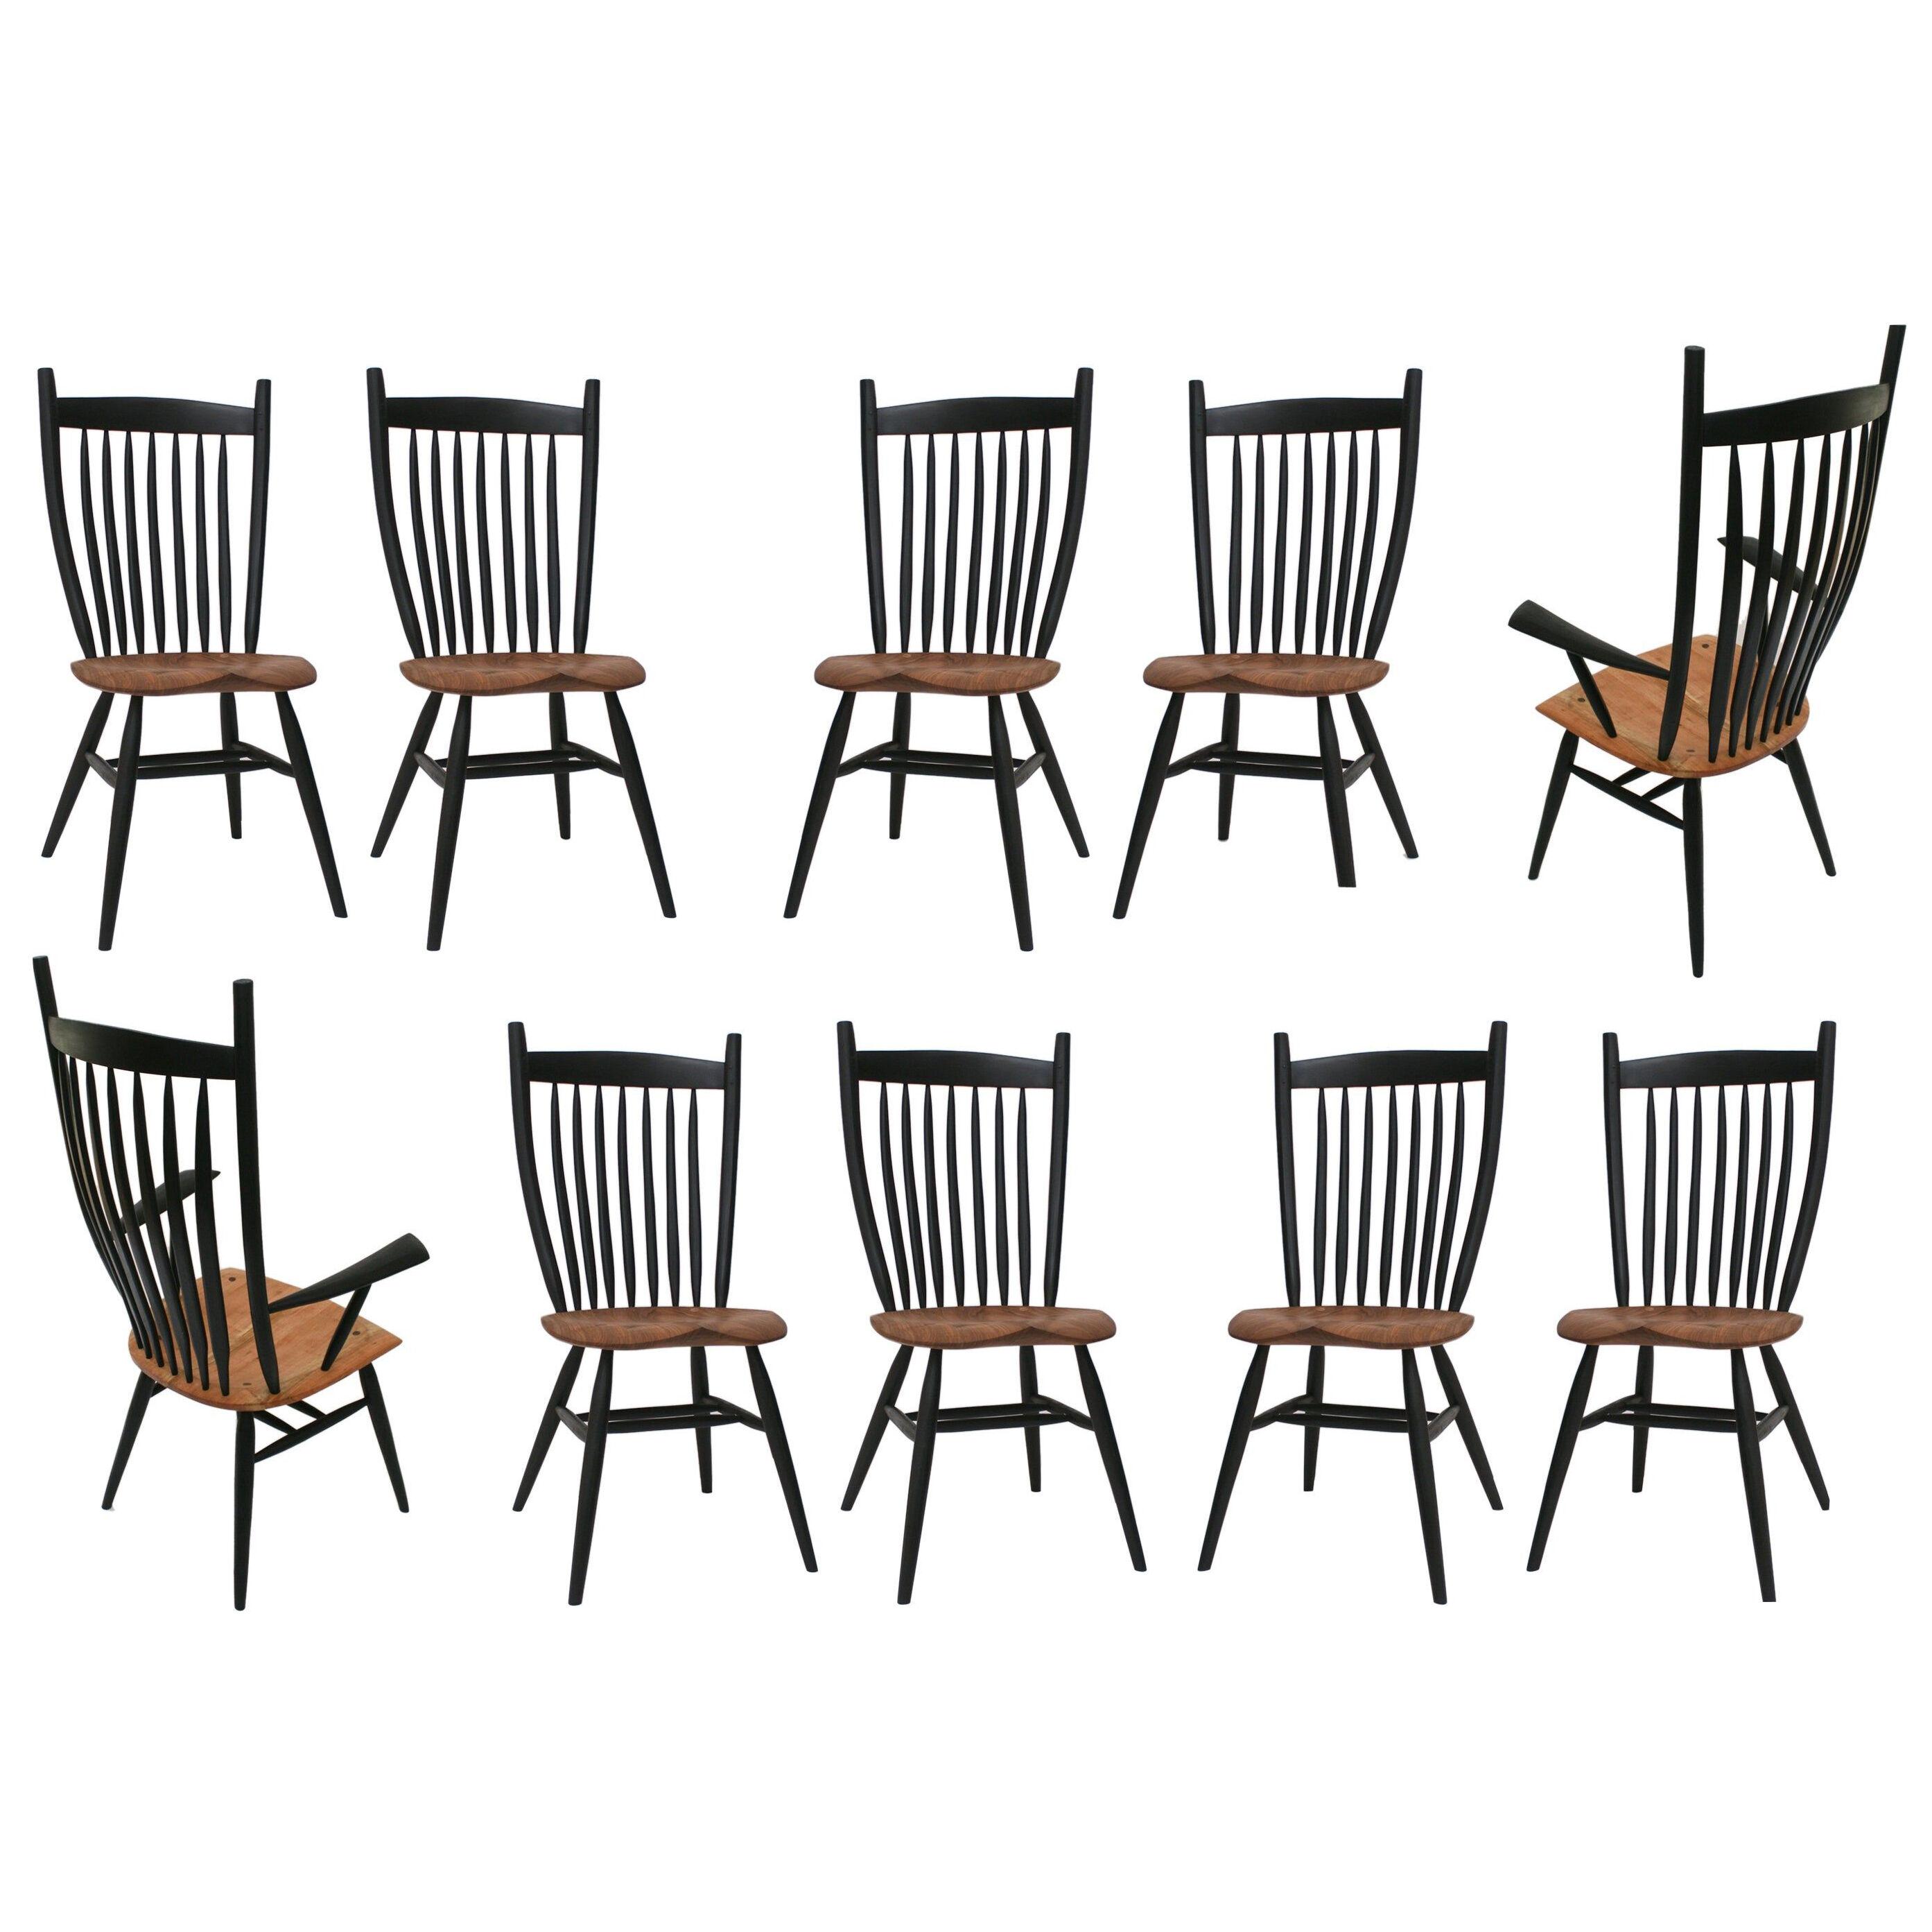 Set of 10 Handcrafted Studio Bent Chairs by Fabian Fischer, Germany, 2019